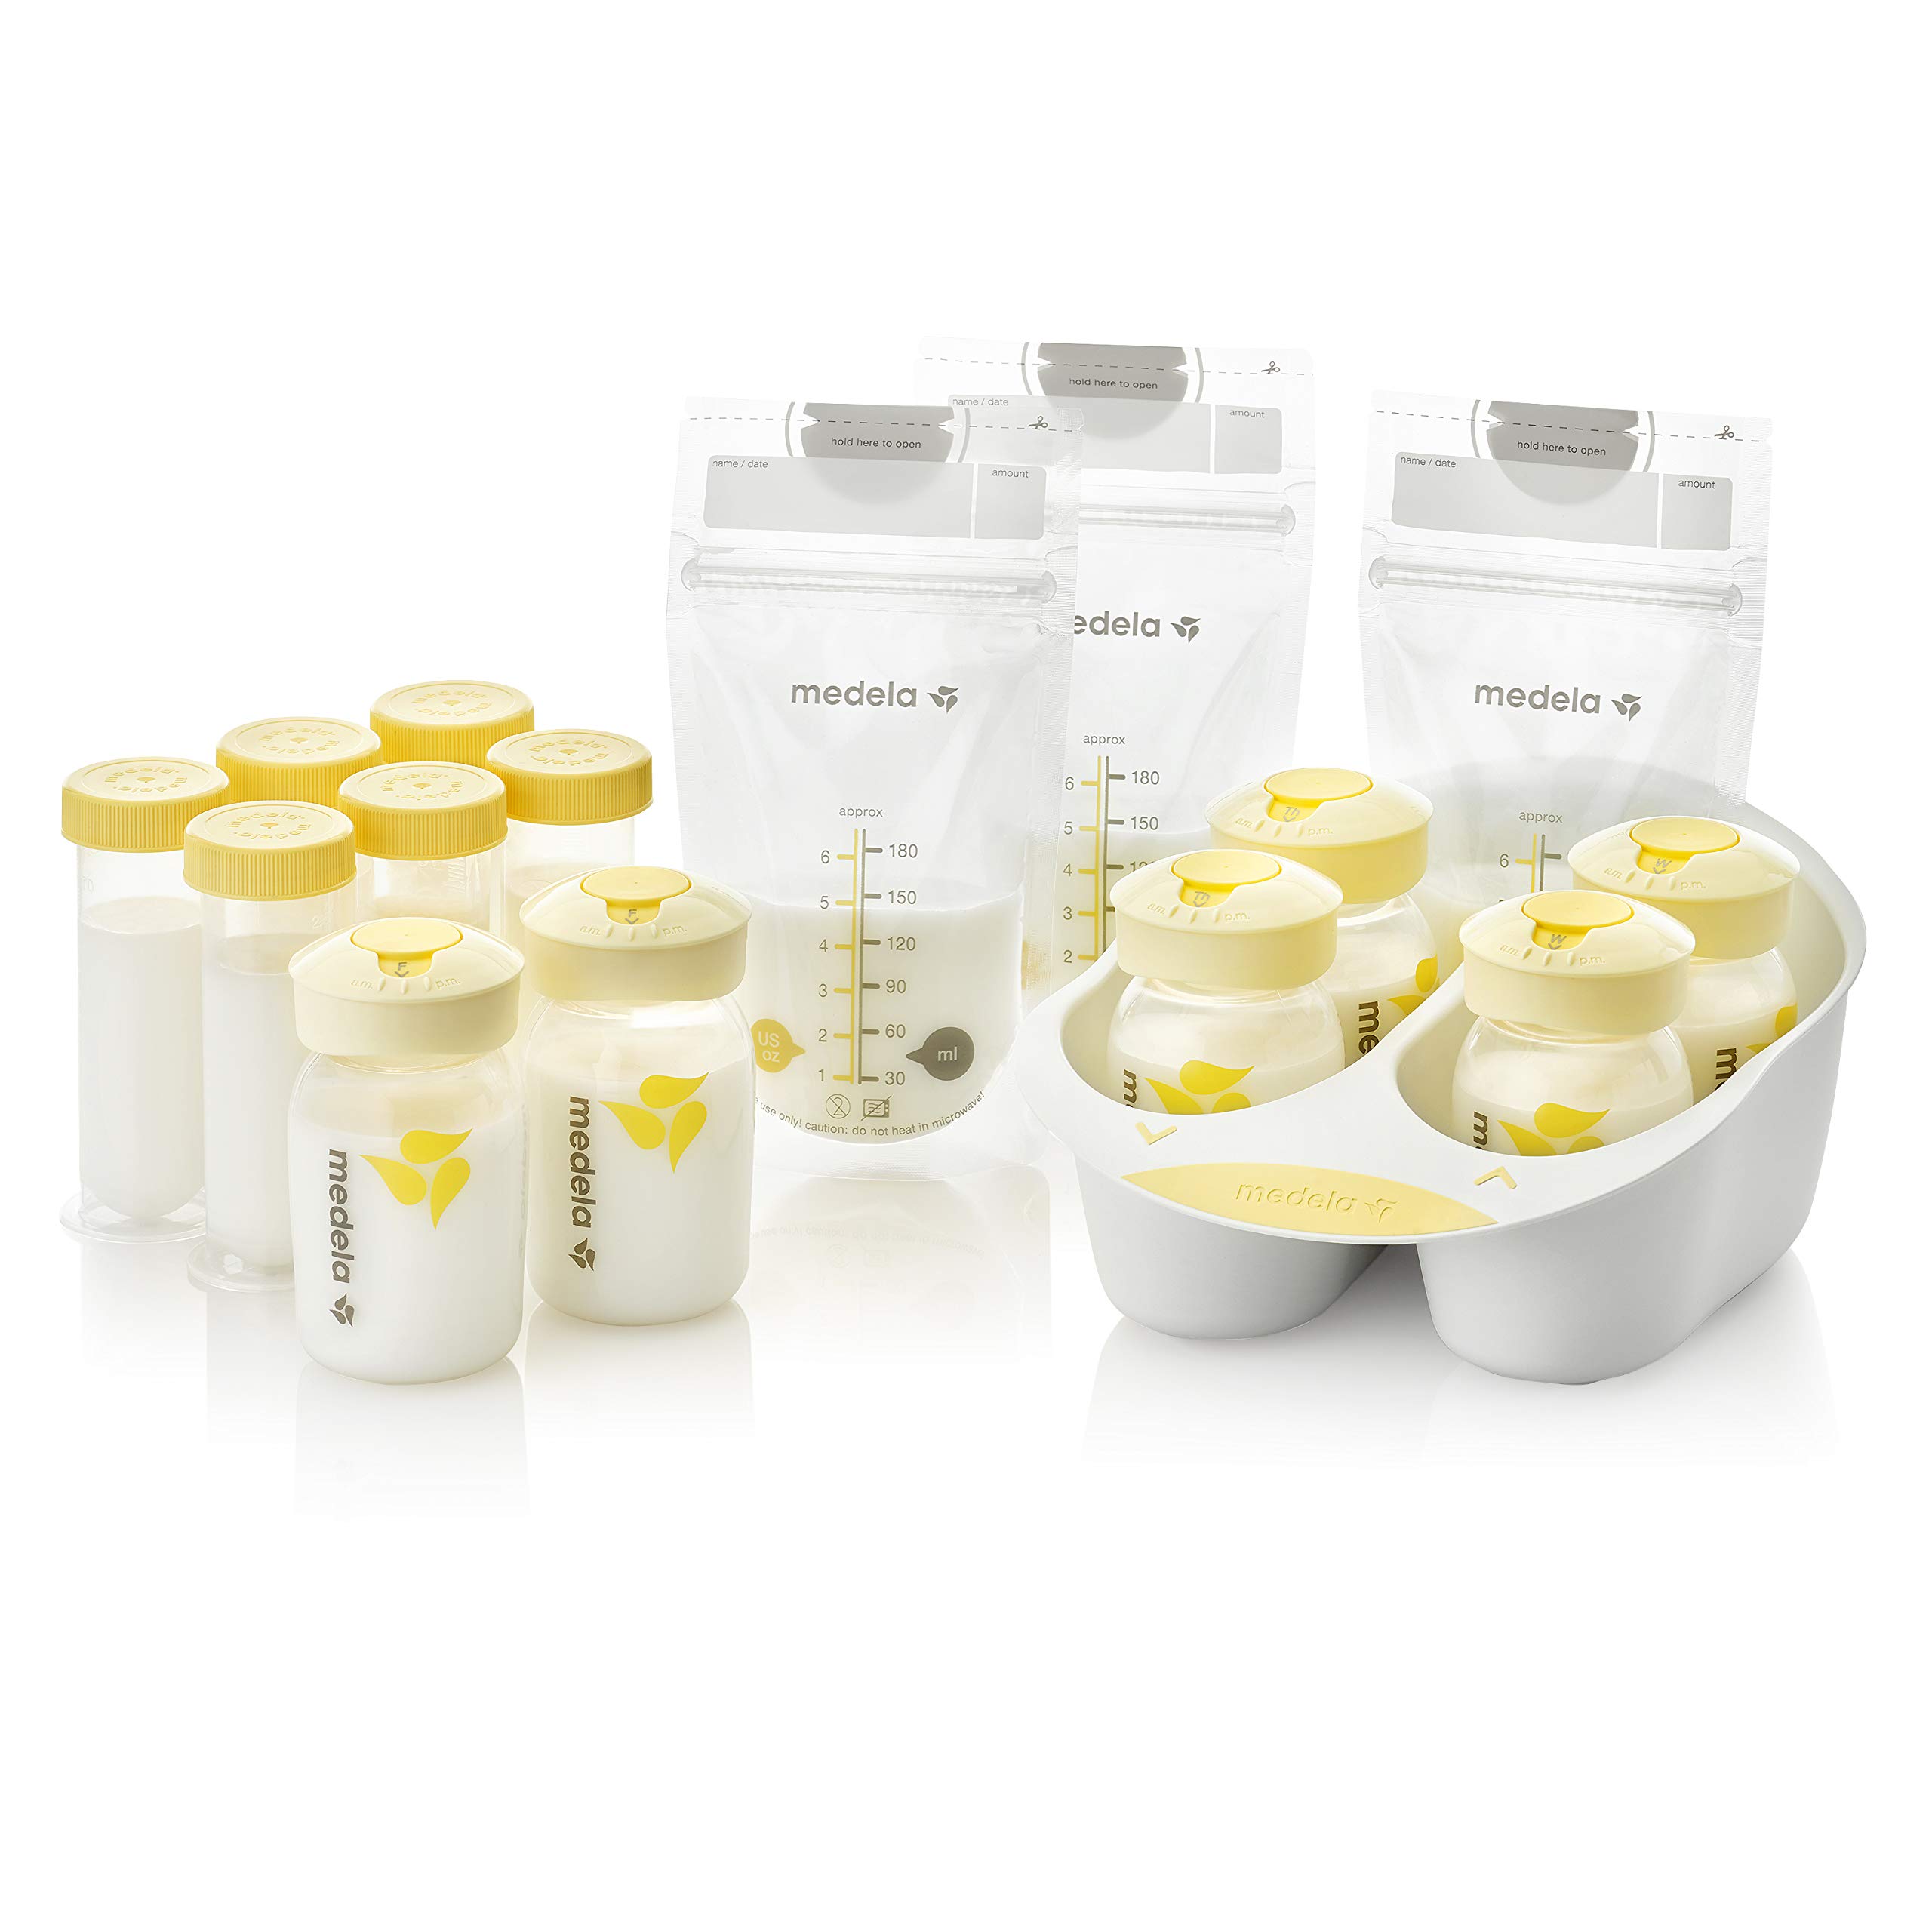 Medela Breast Milk Storage Solution Set, Breastfeeding Supplies & Containers, Breastmilk Organizer & Medela Manual Breast Pump with Flex Shields Harmony Single Hand for More Comfort and Expressing